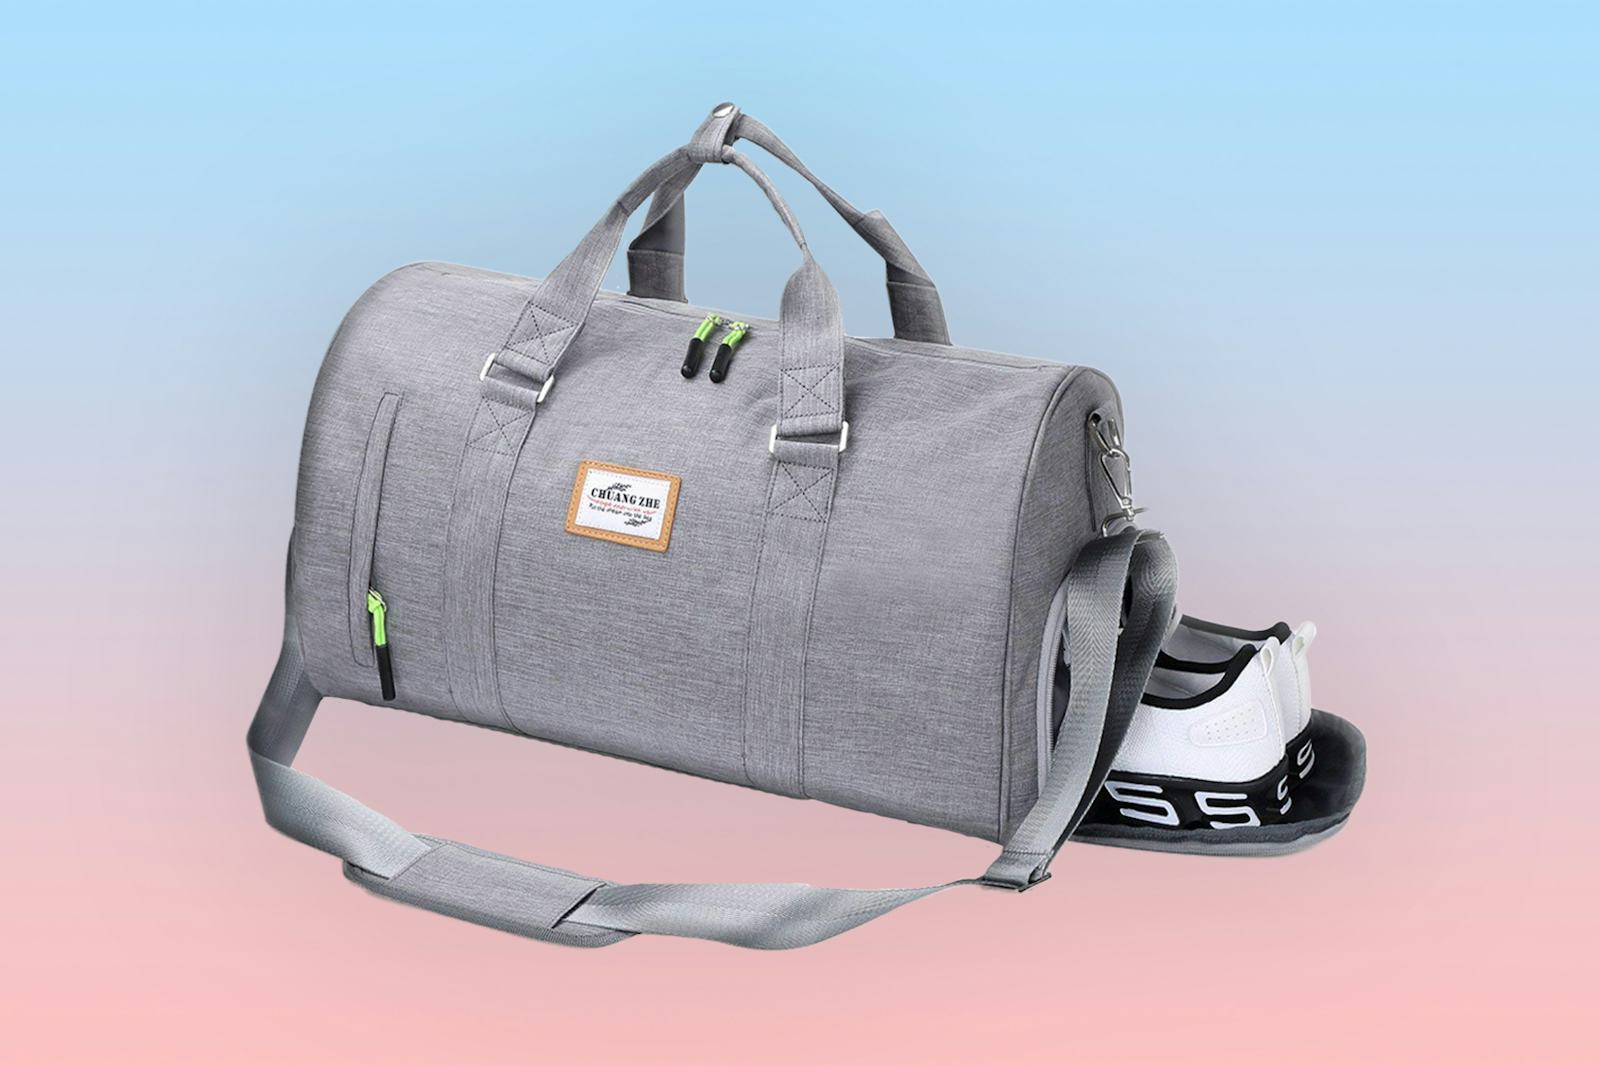 best travel tote with shoe compartment